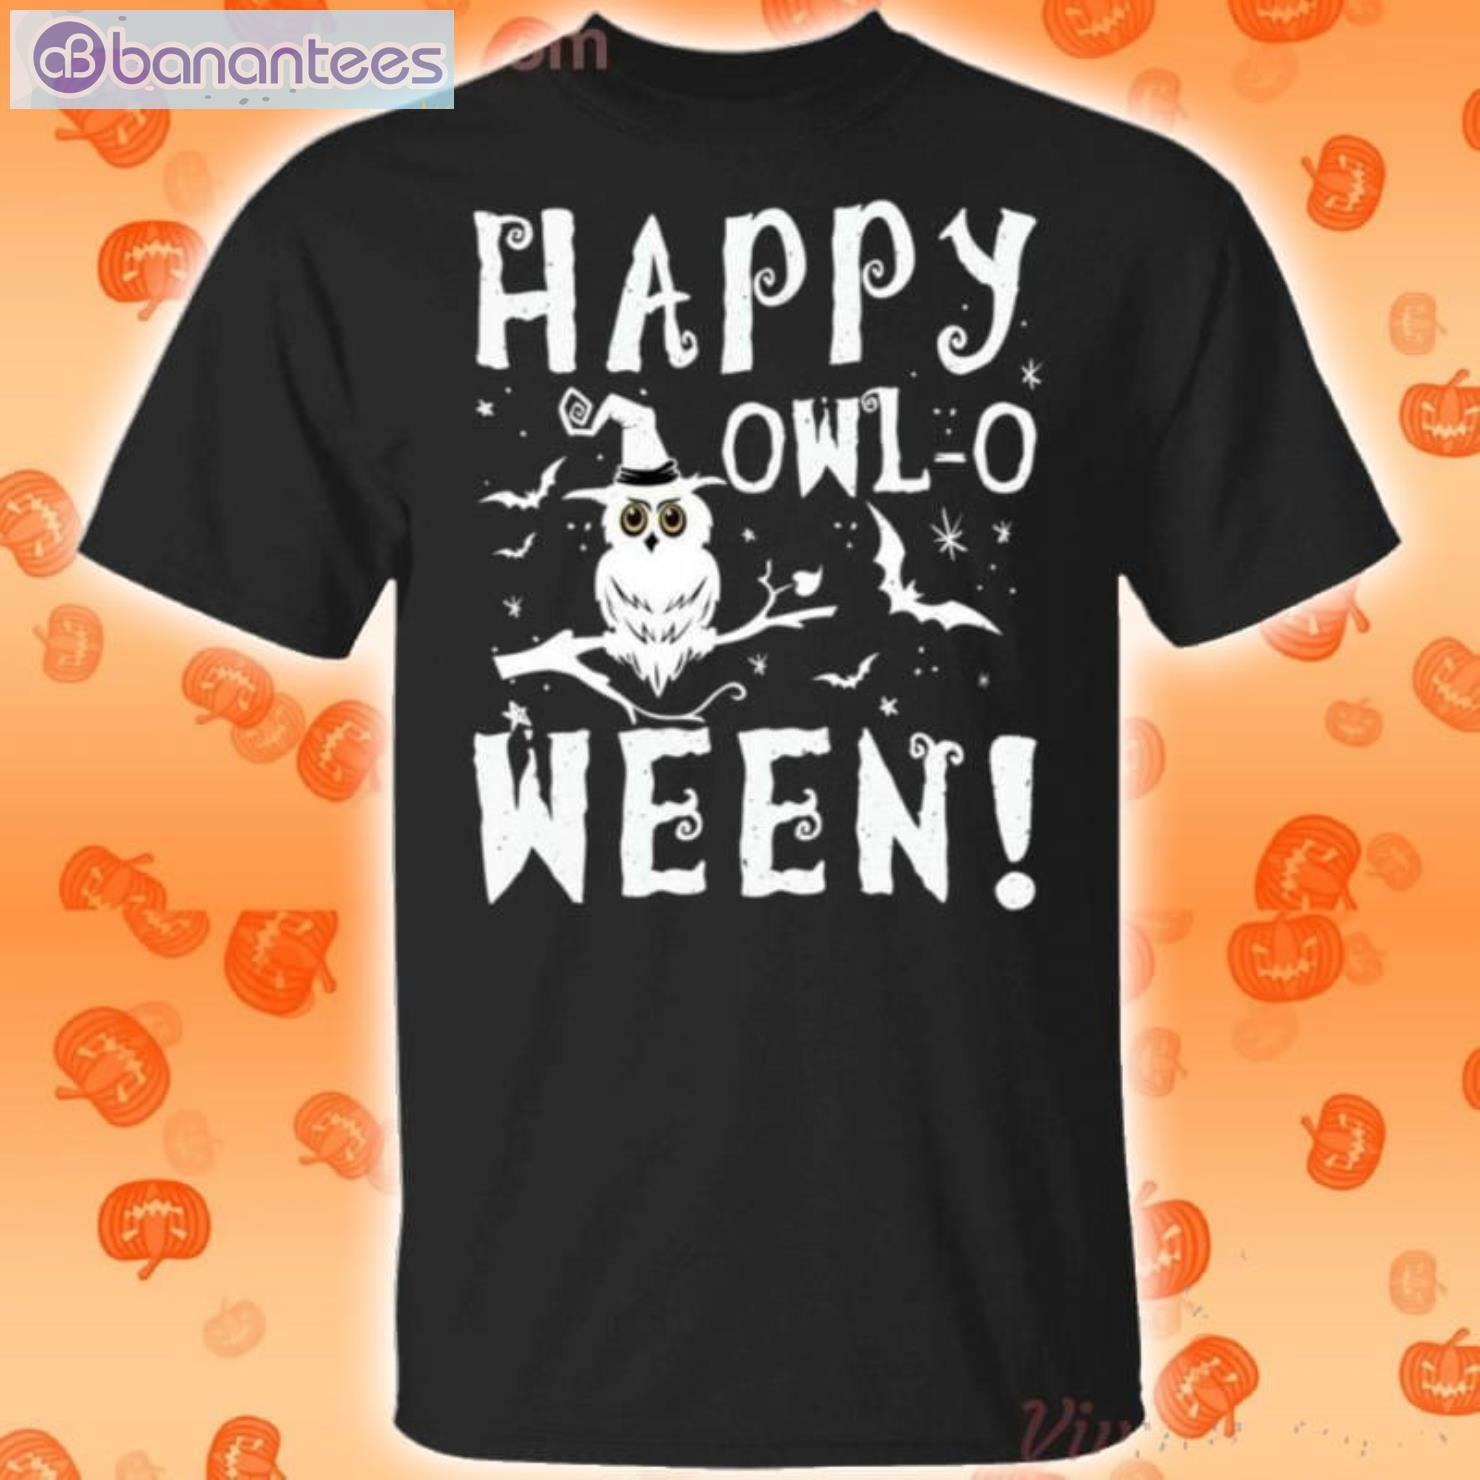 Happy Owl-O-Ween-Funny Owl Halloween T-Shirt Product Photo 1 Product photo 1